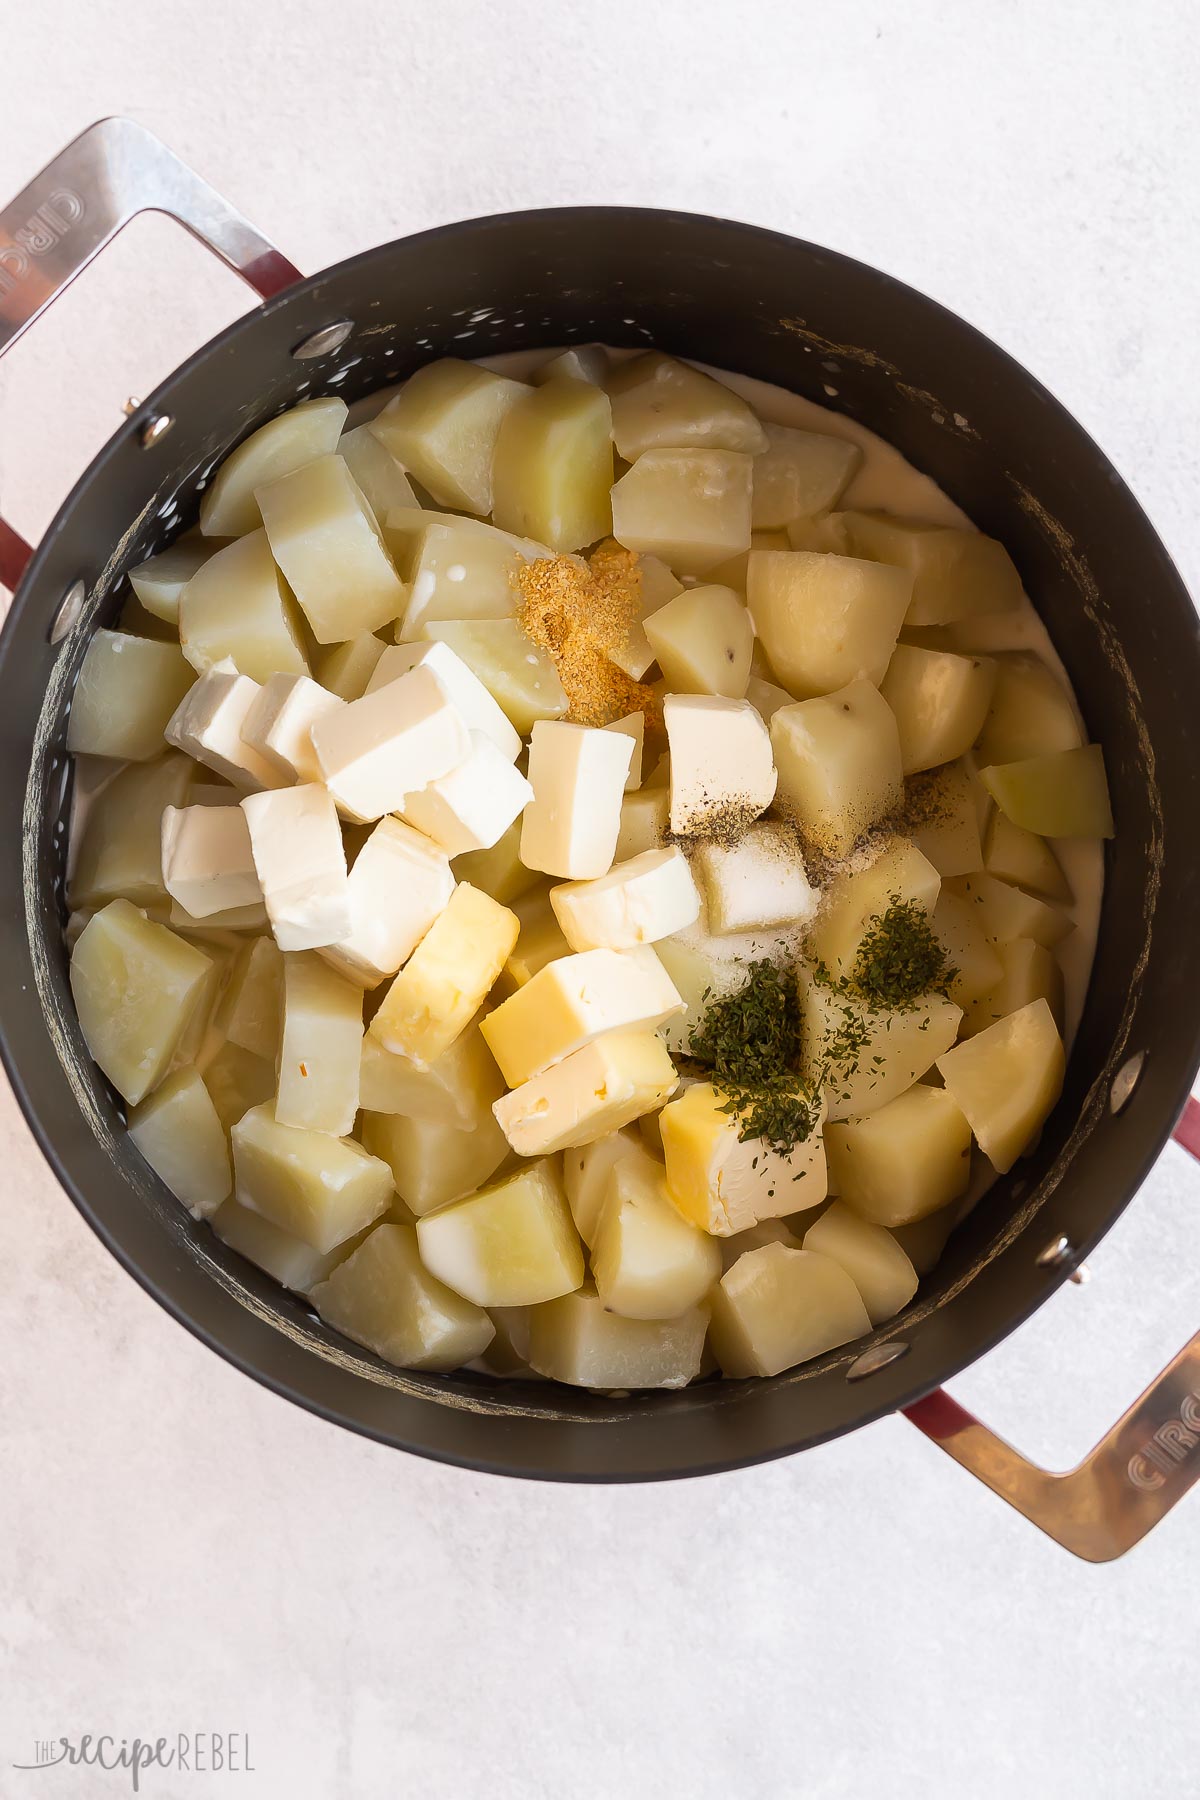 cream cheese butter and seasonings added to cooked potatoes.